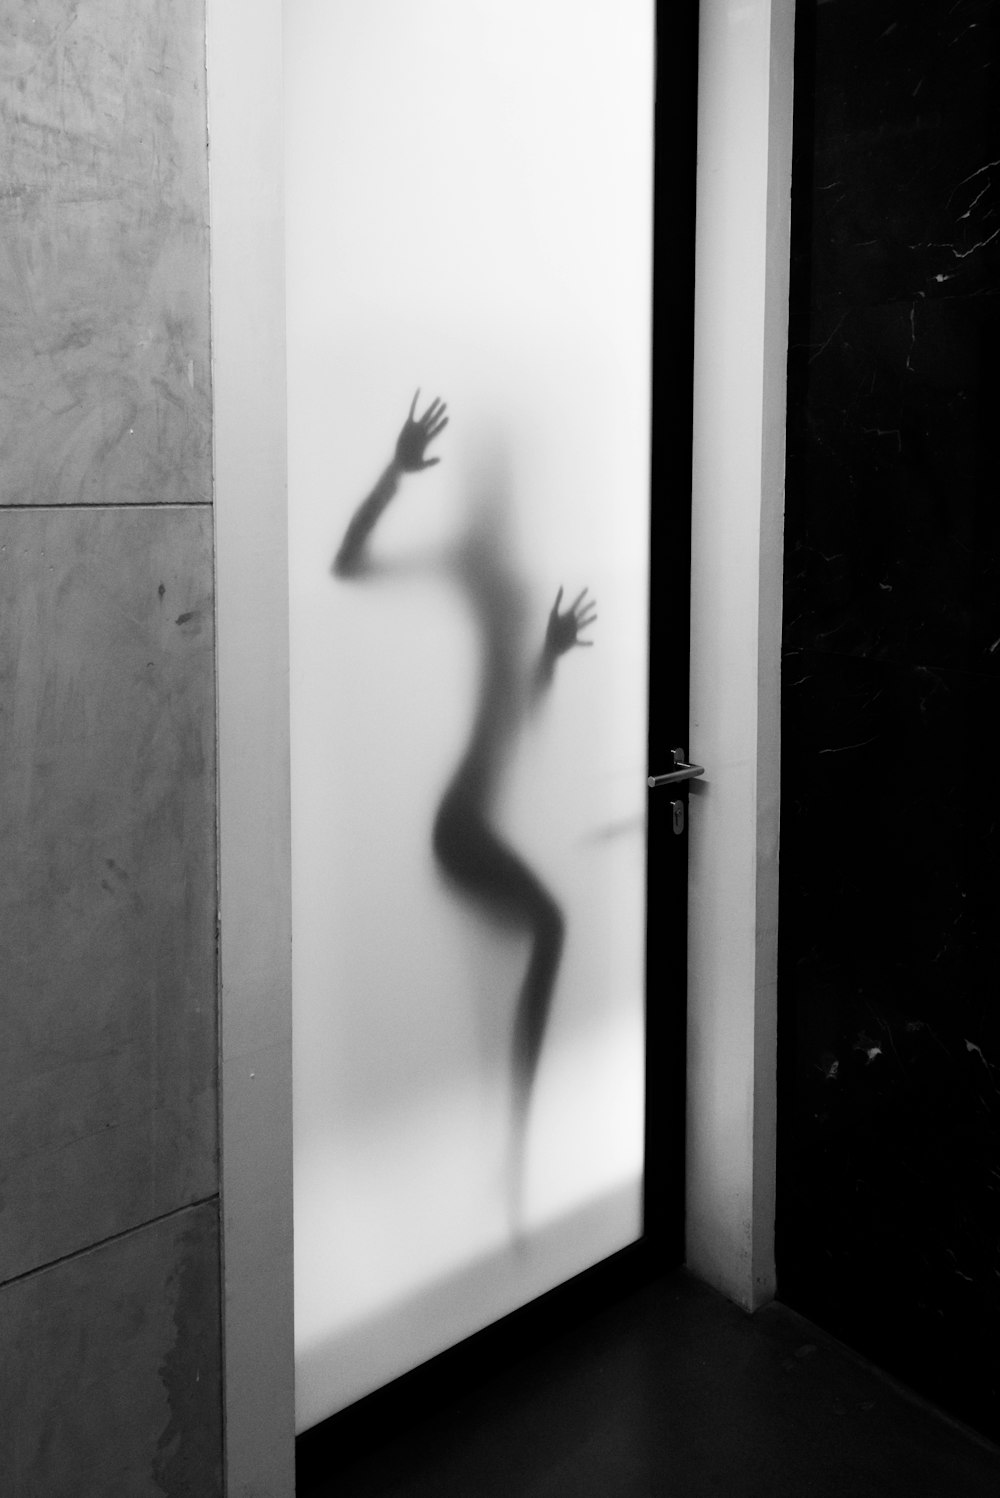 shadow of person against white panel glass door